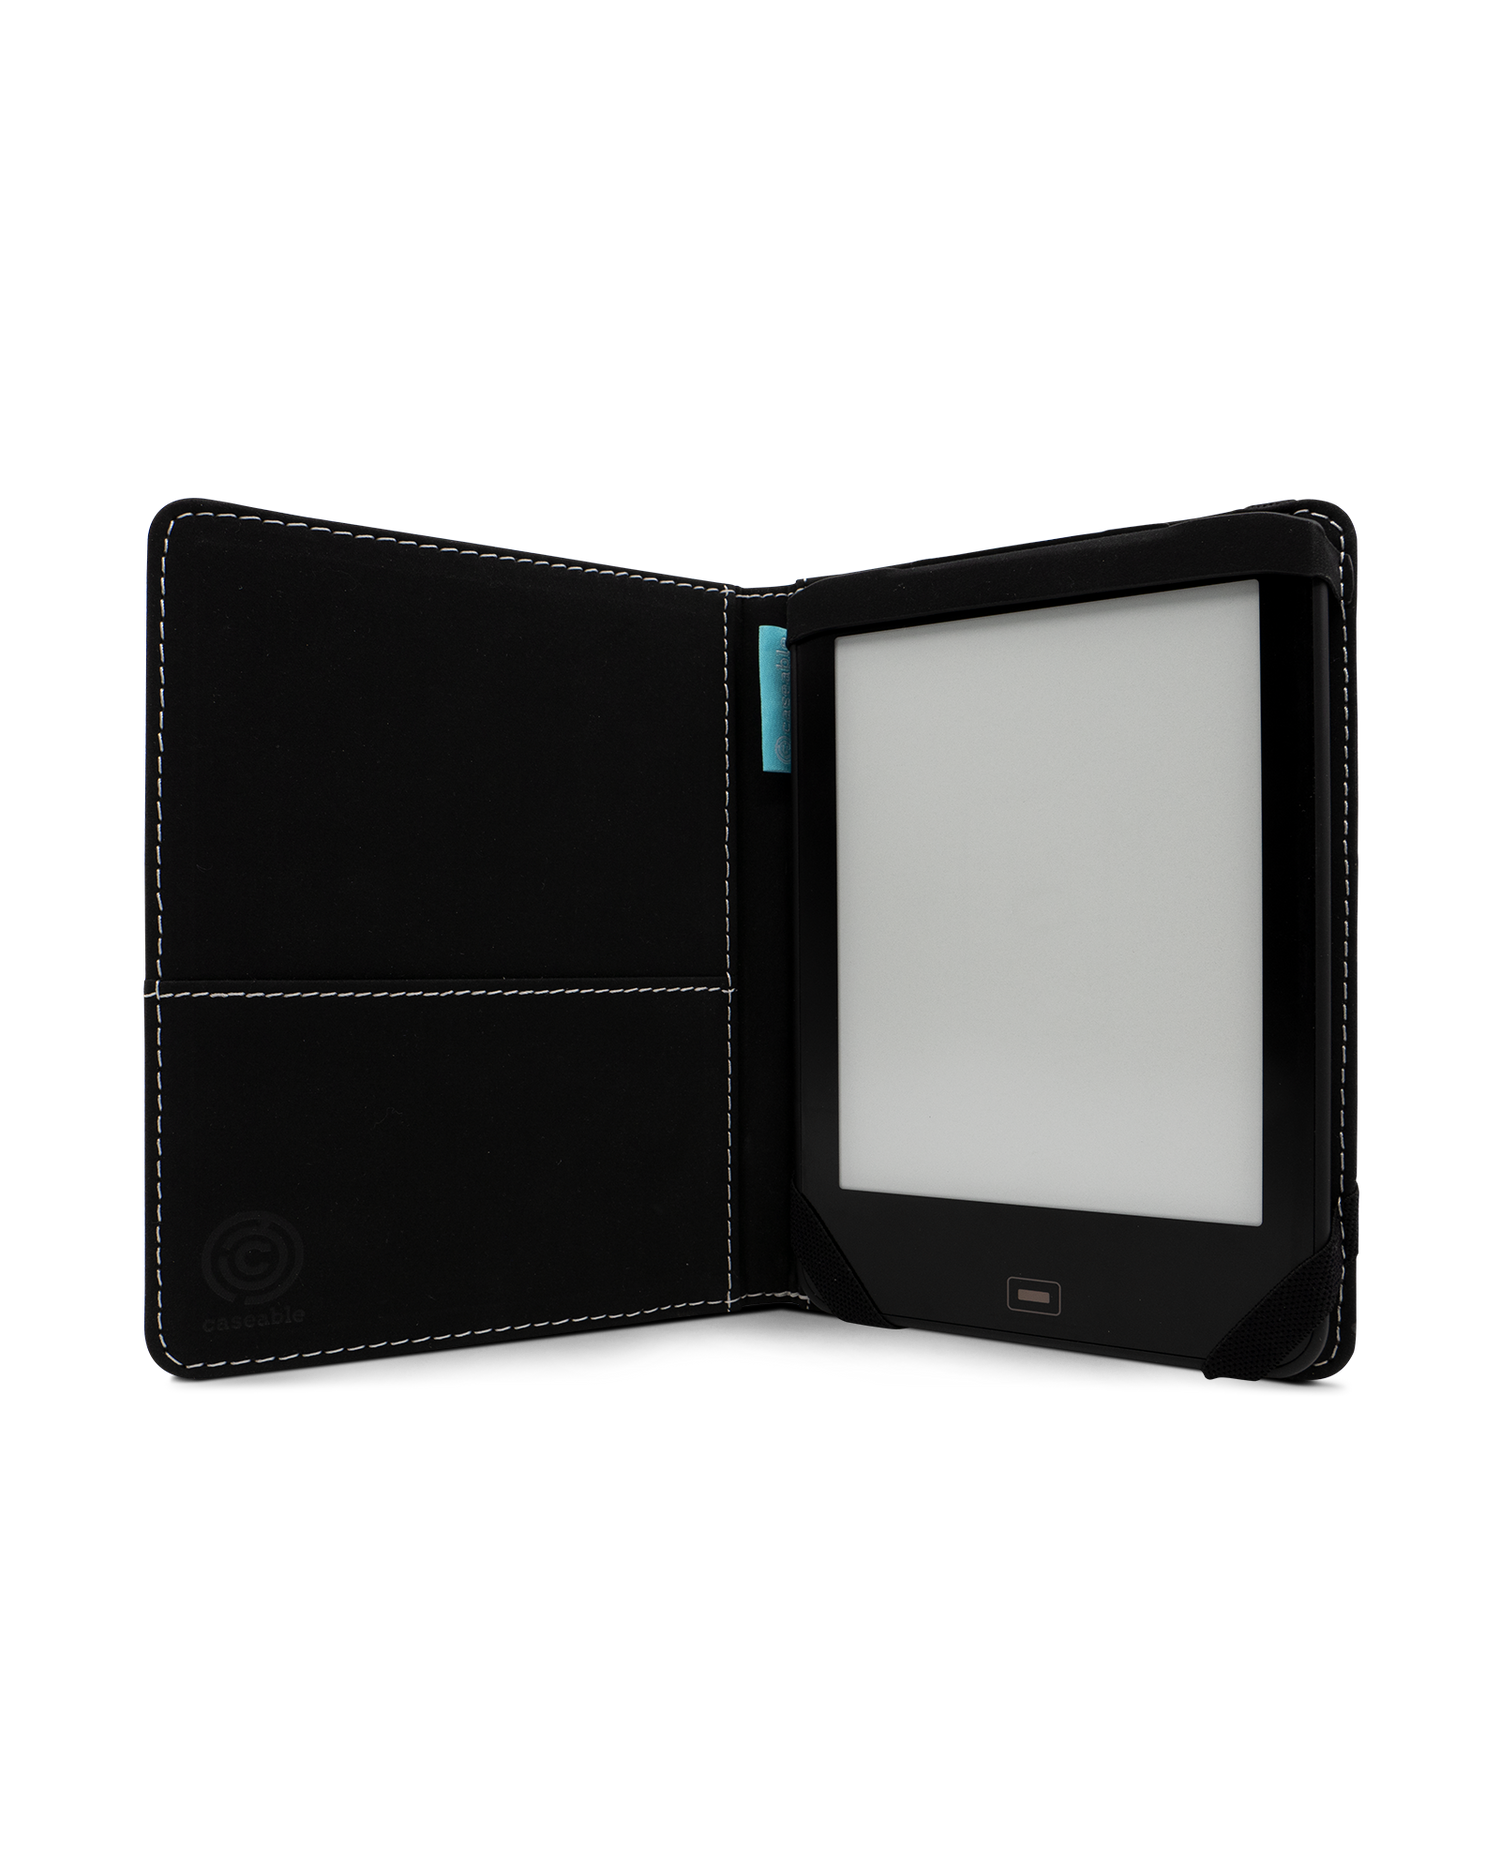 Retro Daisy eReader Case for tolino vision 1 to 4 HD: Opened interior view